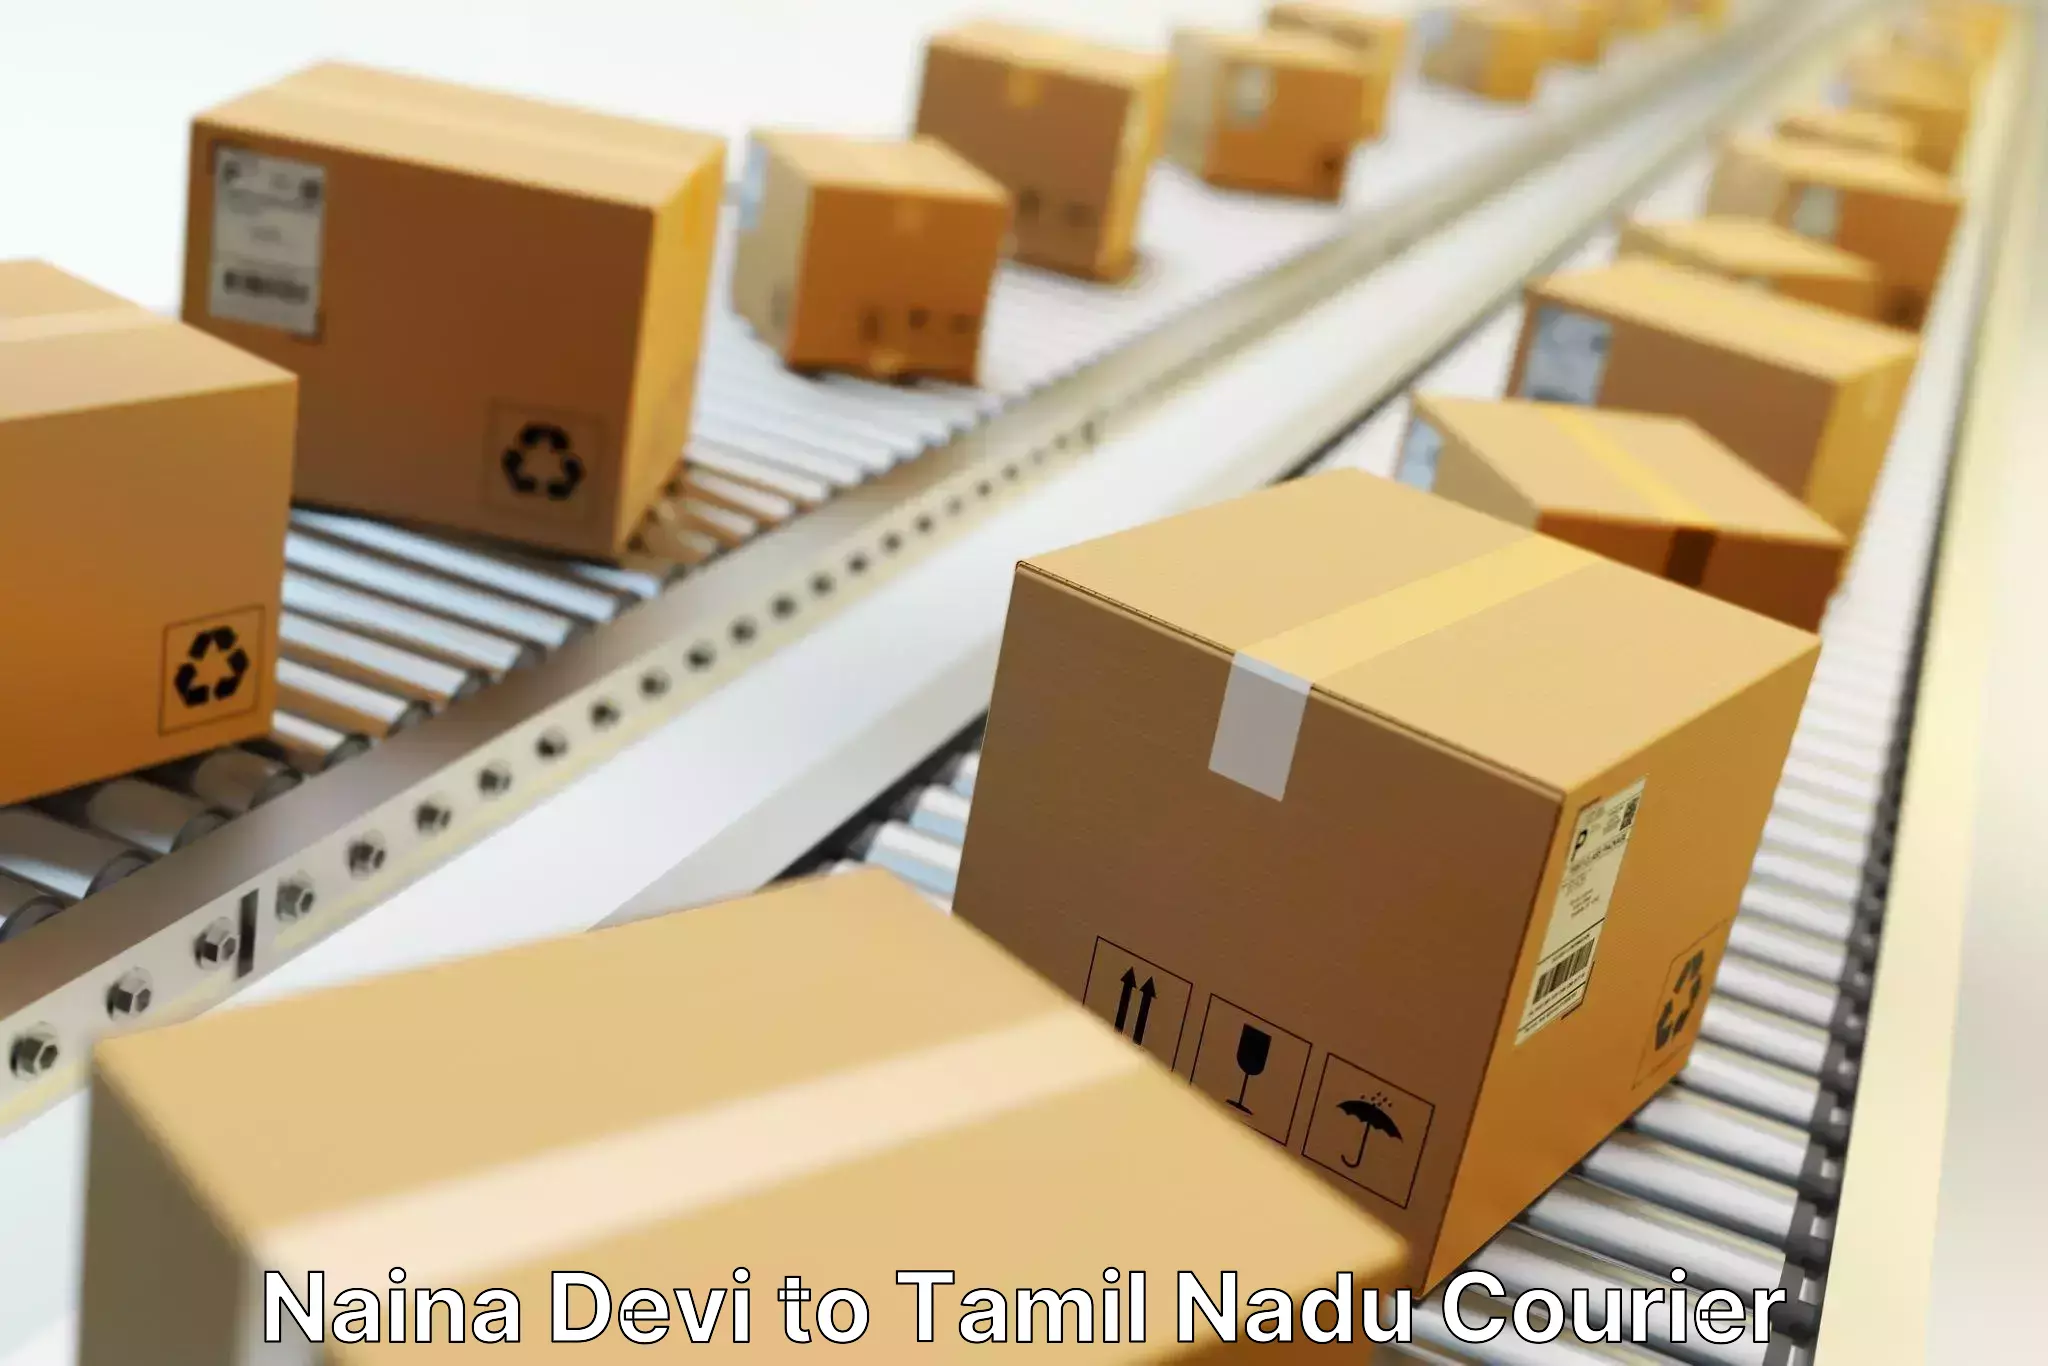 24-hour delivery options Naina Devi to Ambattur